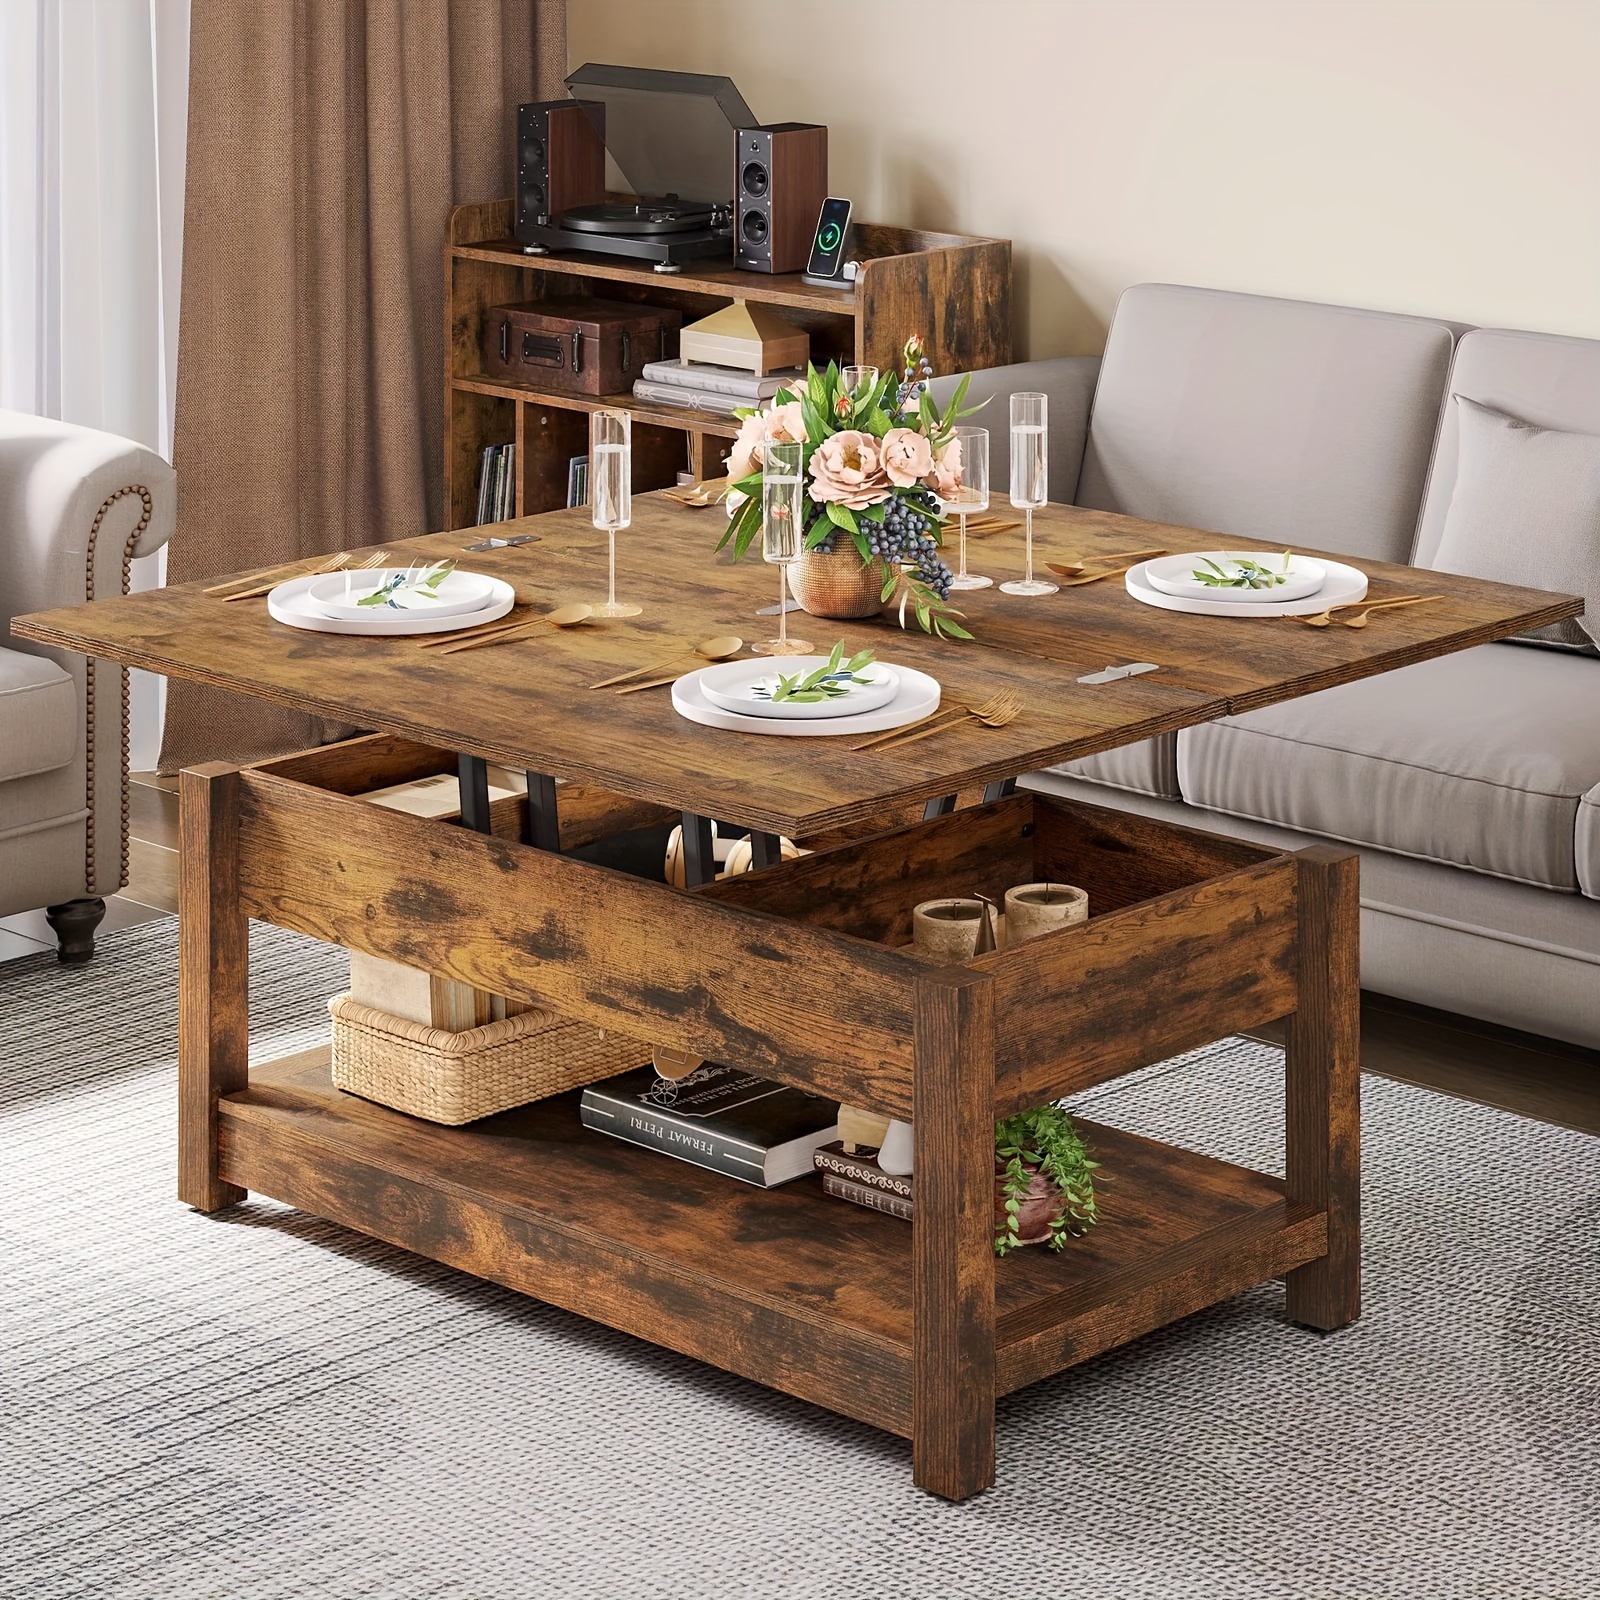 

Dwvo 41" Lift Top Coffee Table 3 In 1 Multi-function Coffee Table For Dining Room